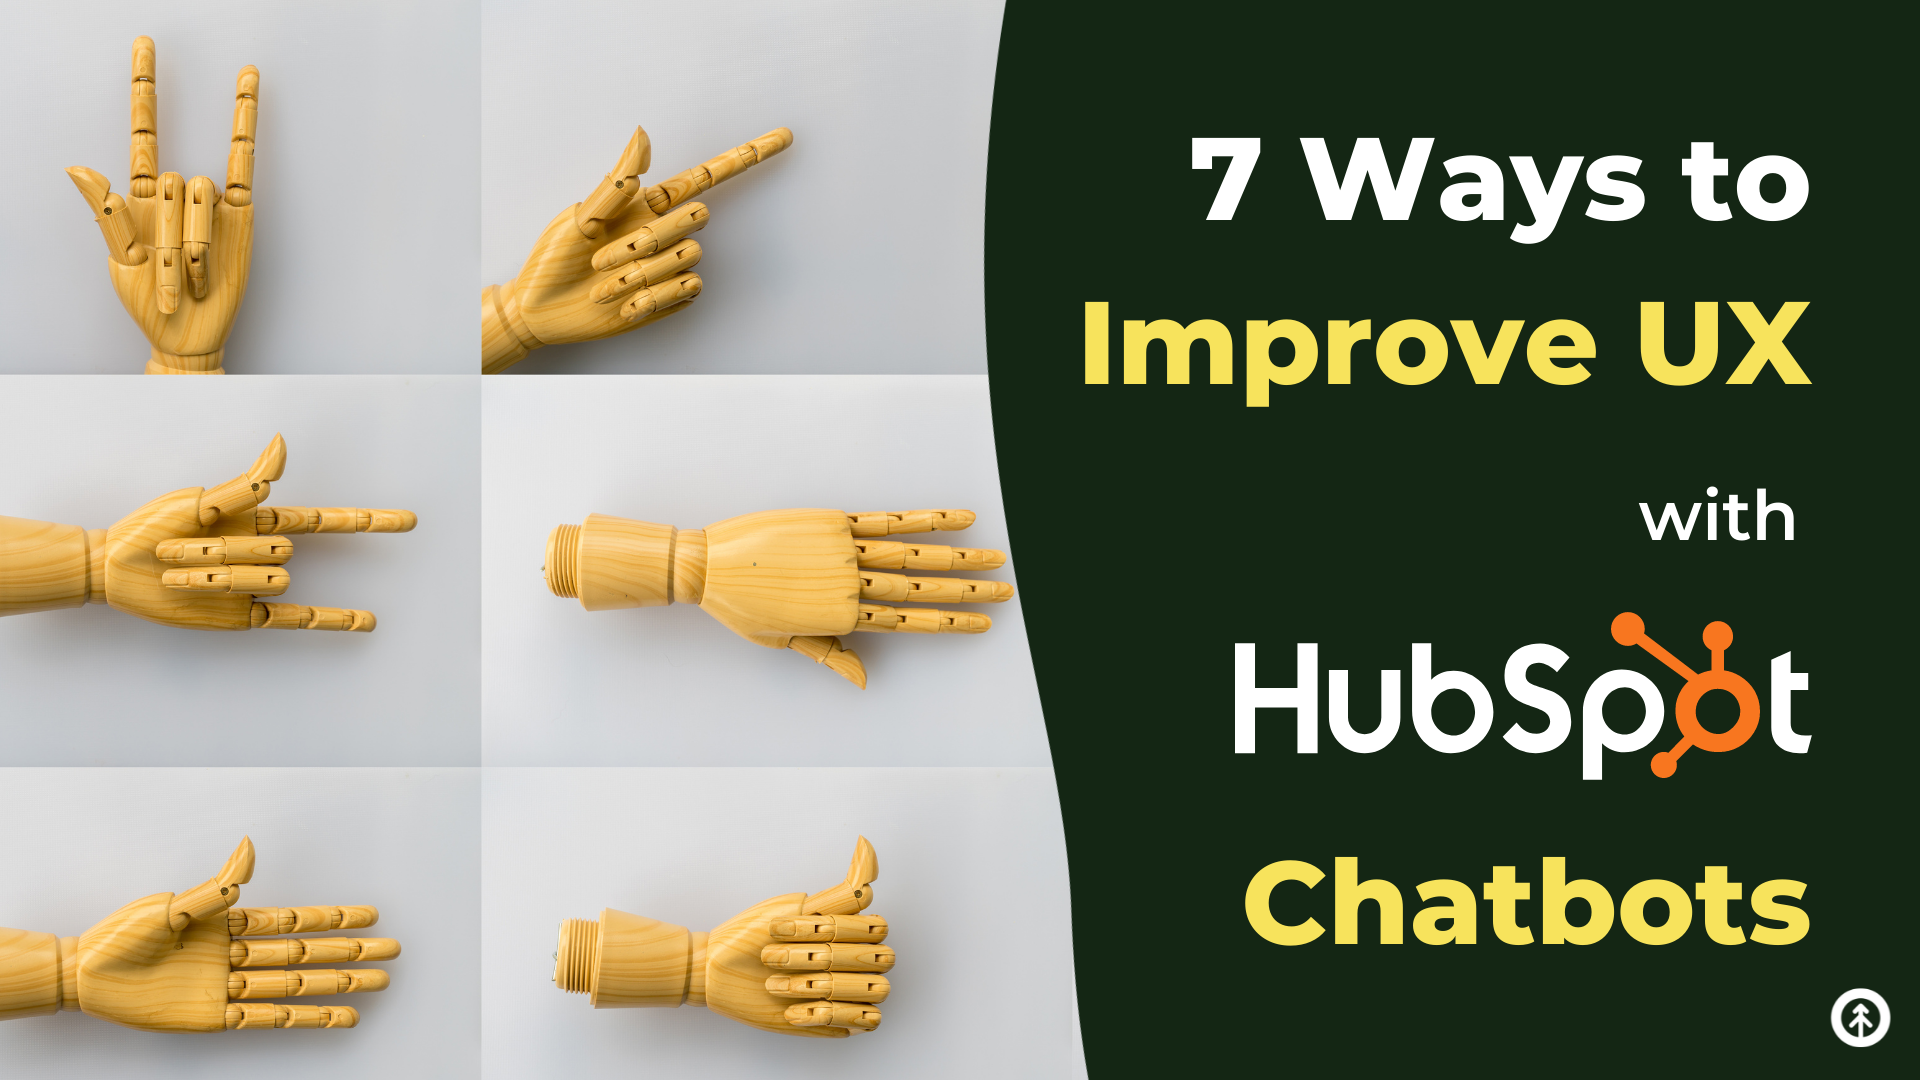 7 Ways to Improve UX with HubSpot Chatbots